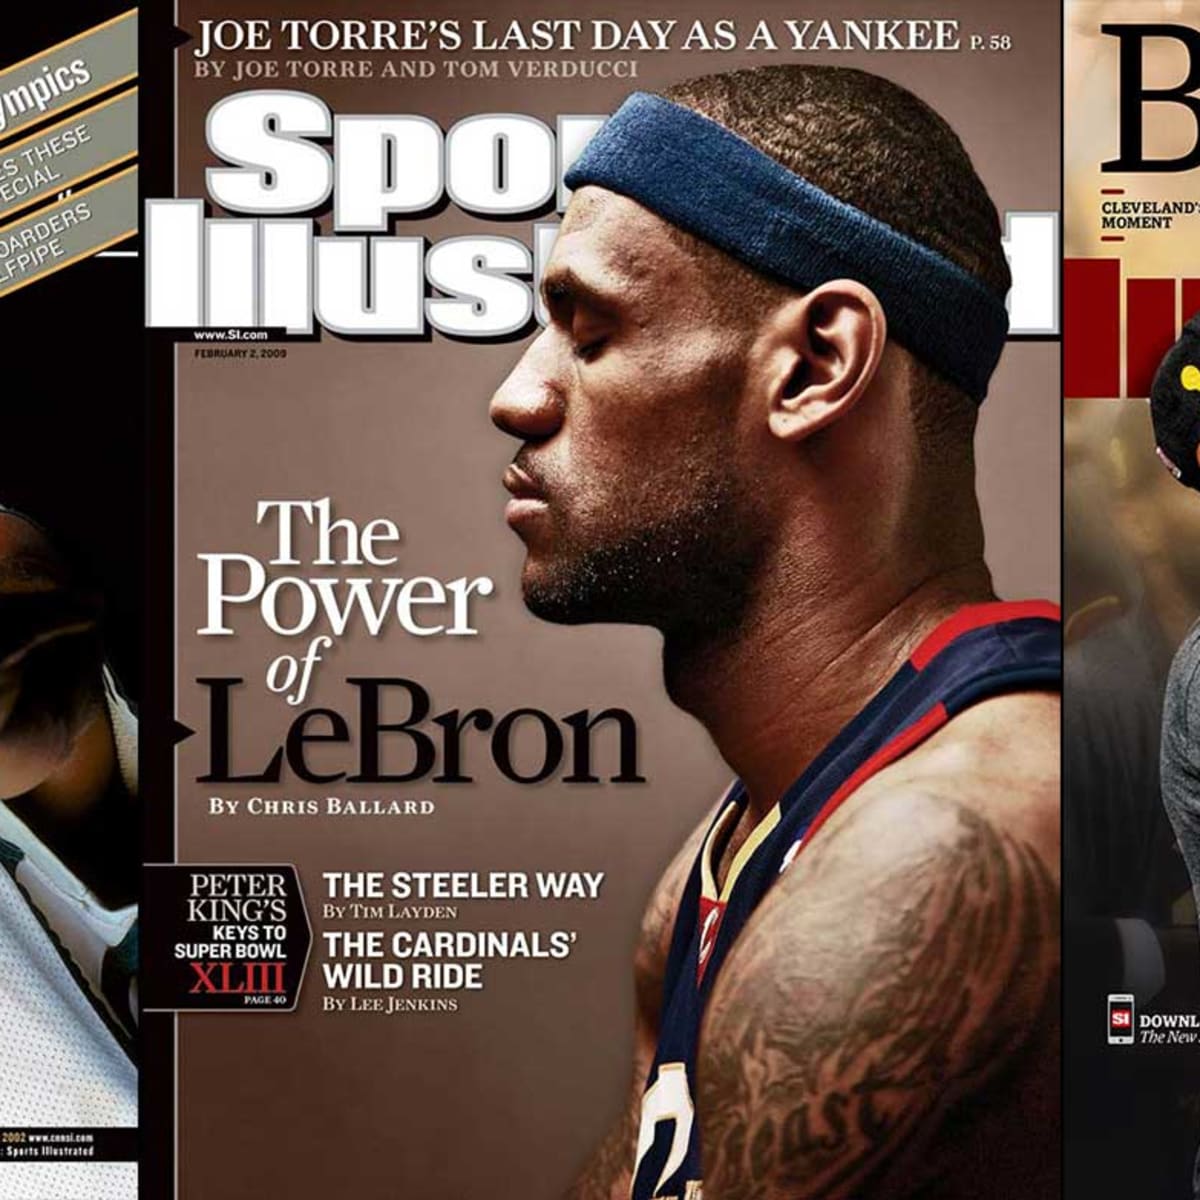 SI's best photos of LeBron James - Sports Illustrated